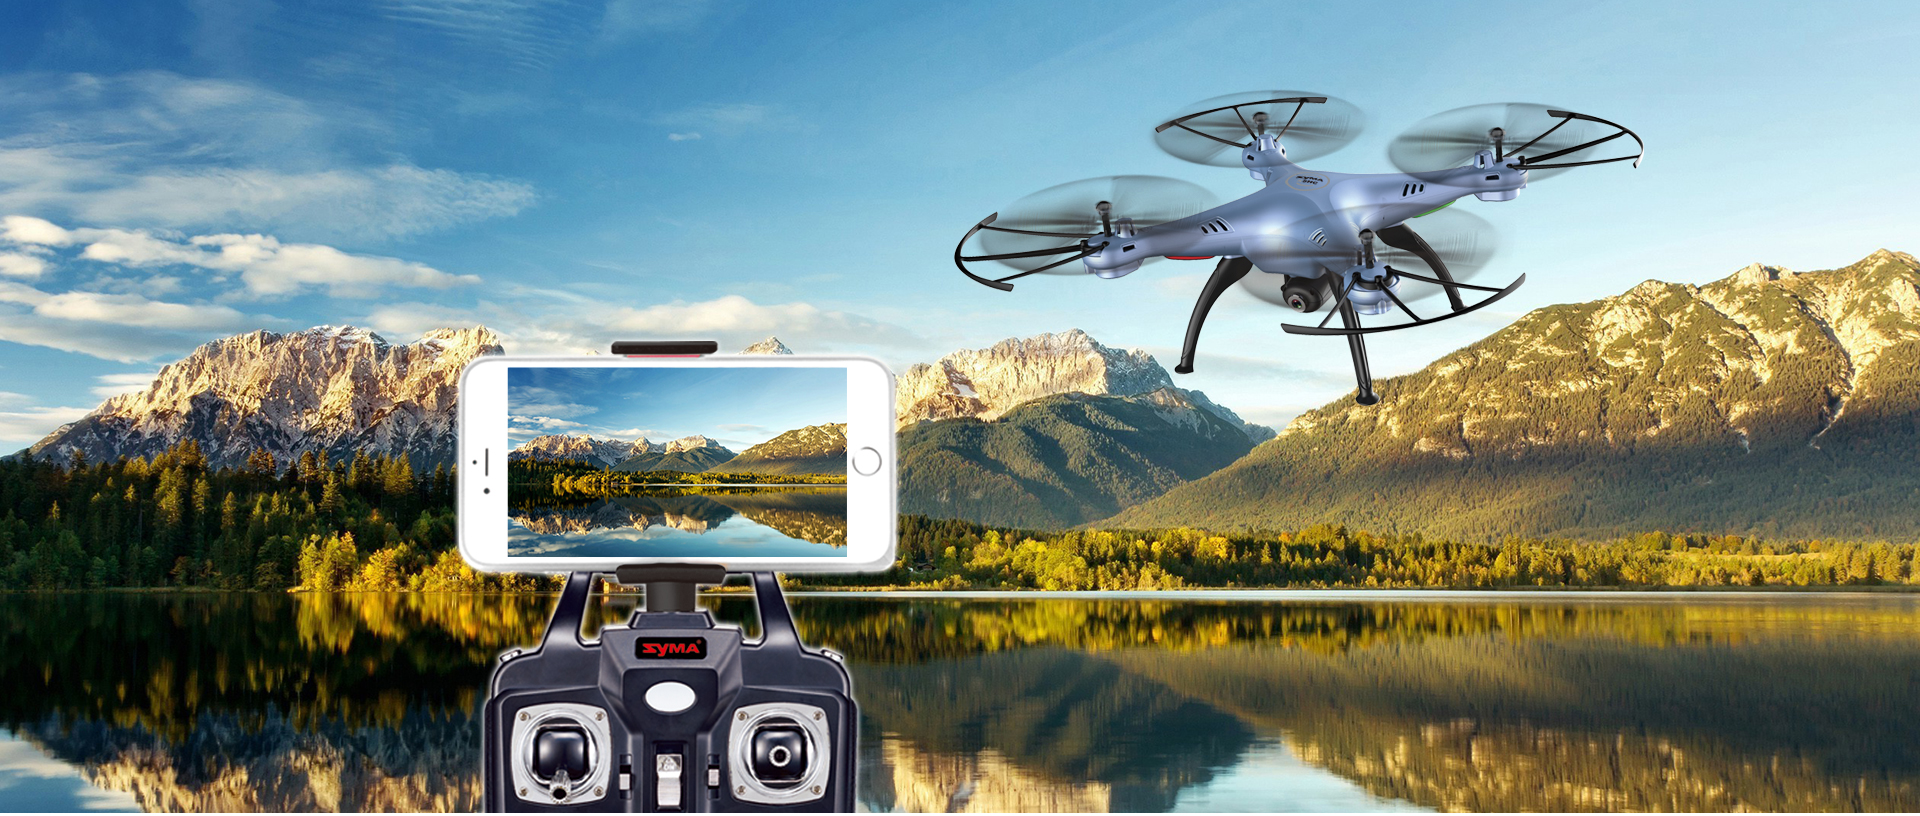 SYMA X5HW FPV REAL-TIME THE NEW DRONE - Smart Drone - SYMA Official Site